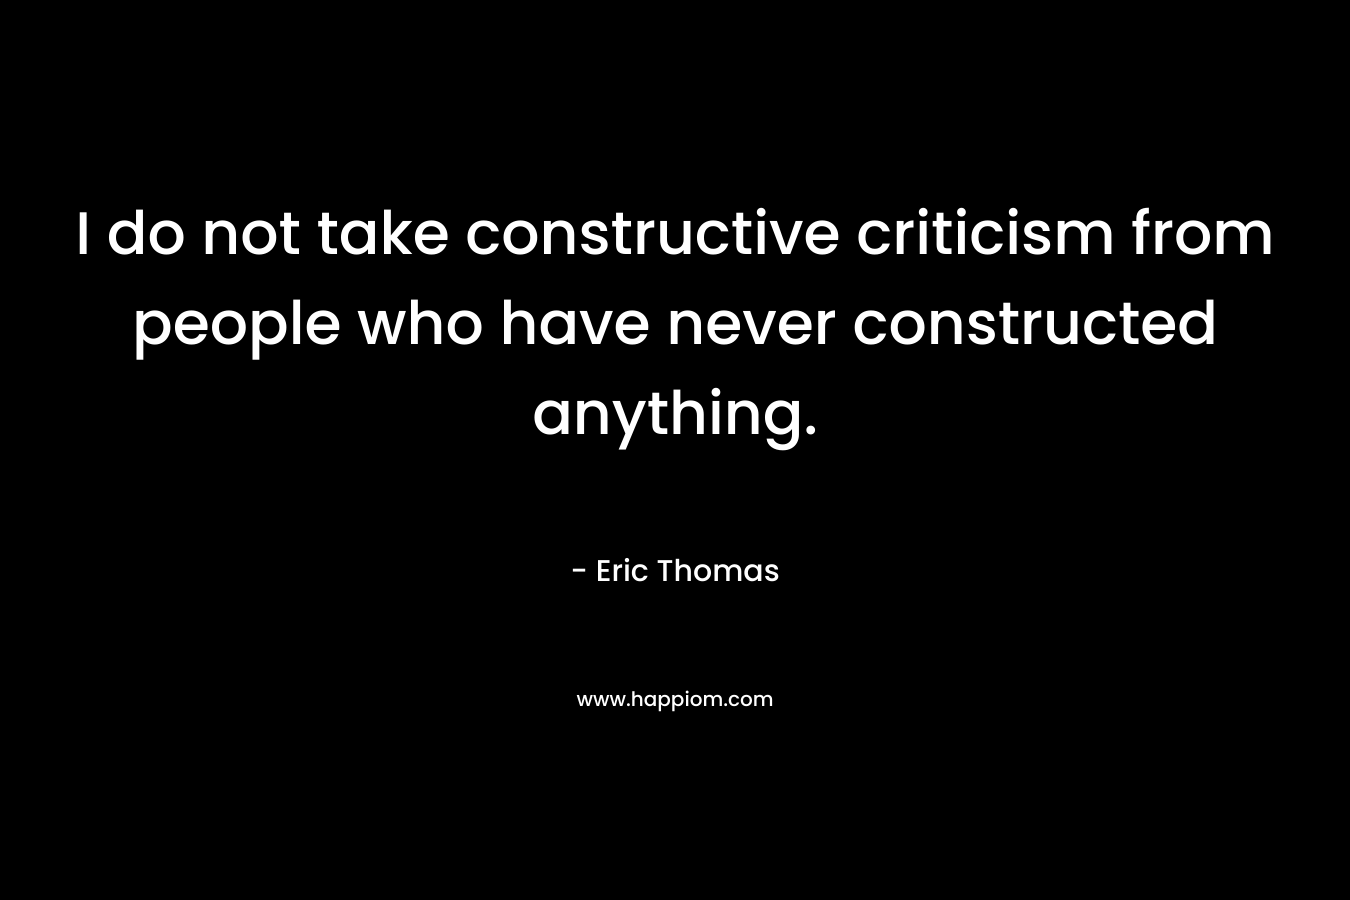 I do not take constructive criticism from people who have never constructed anything.